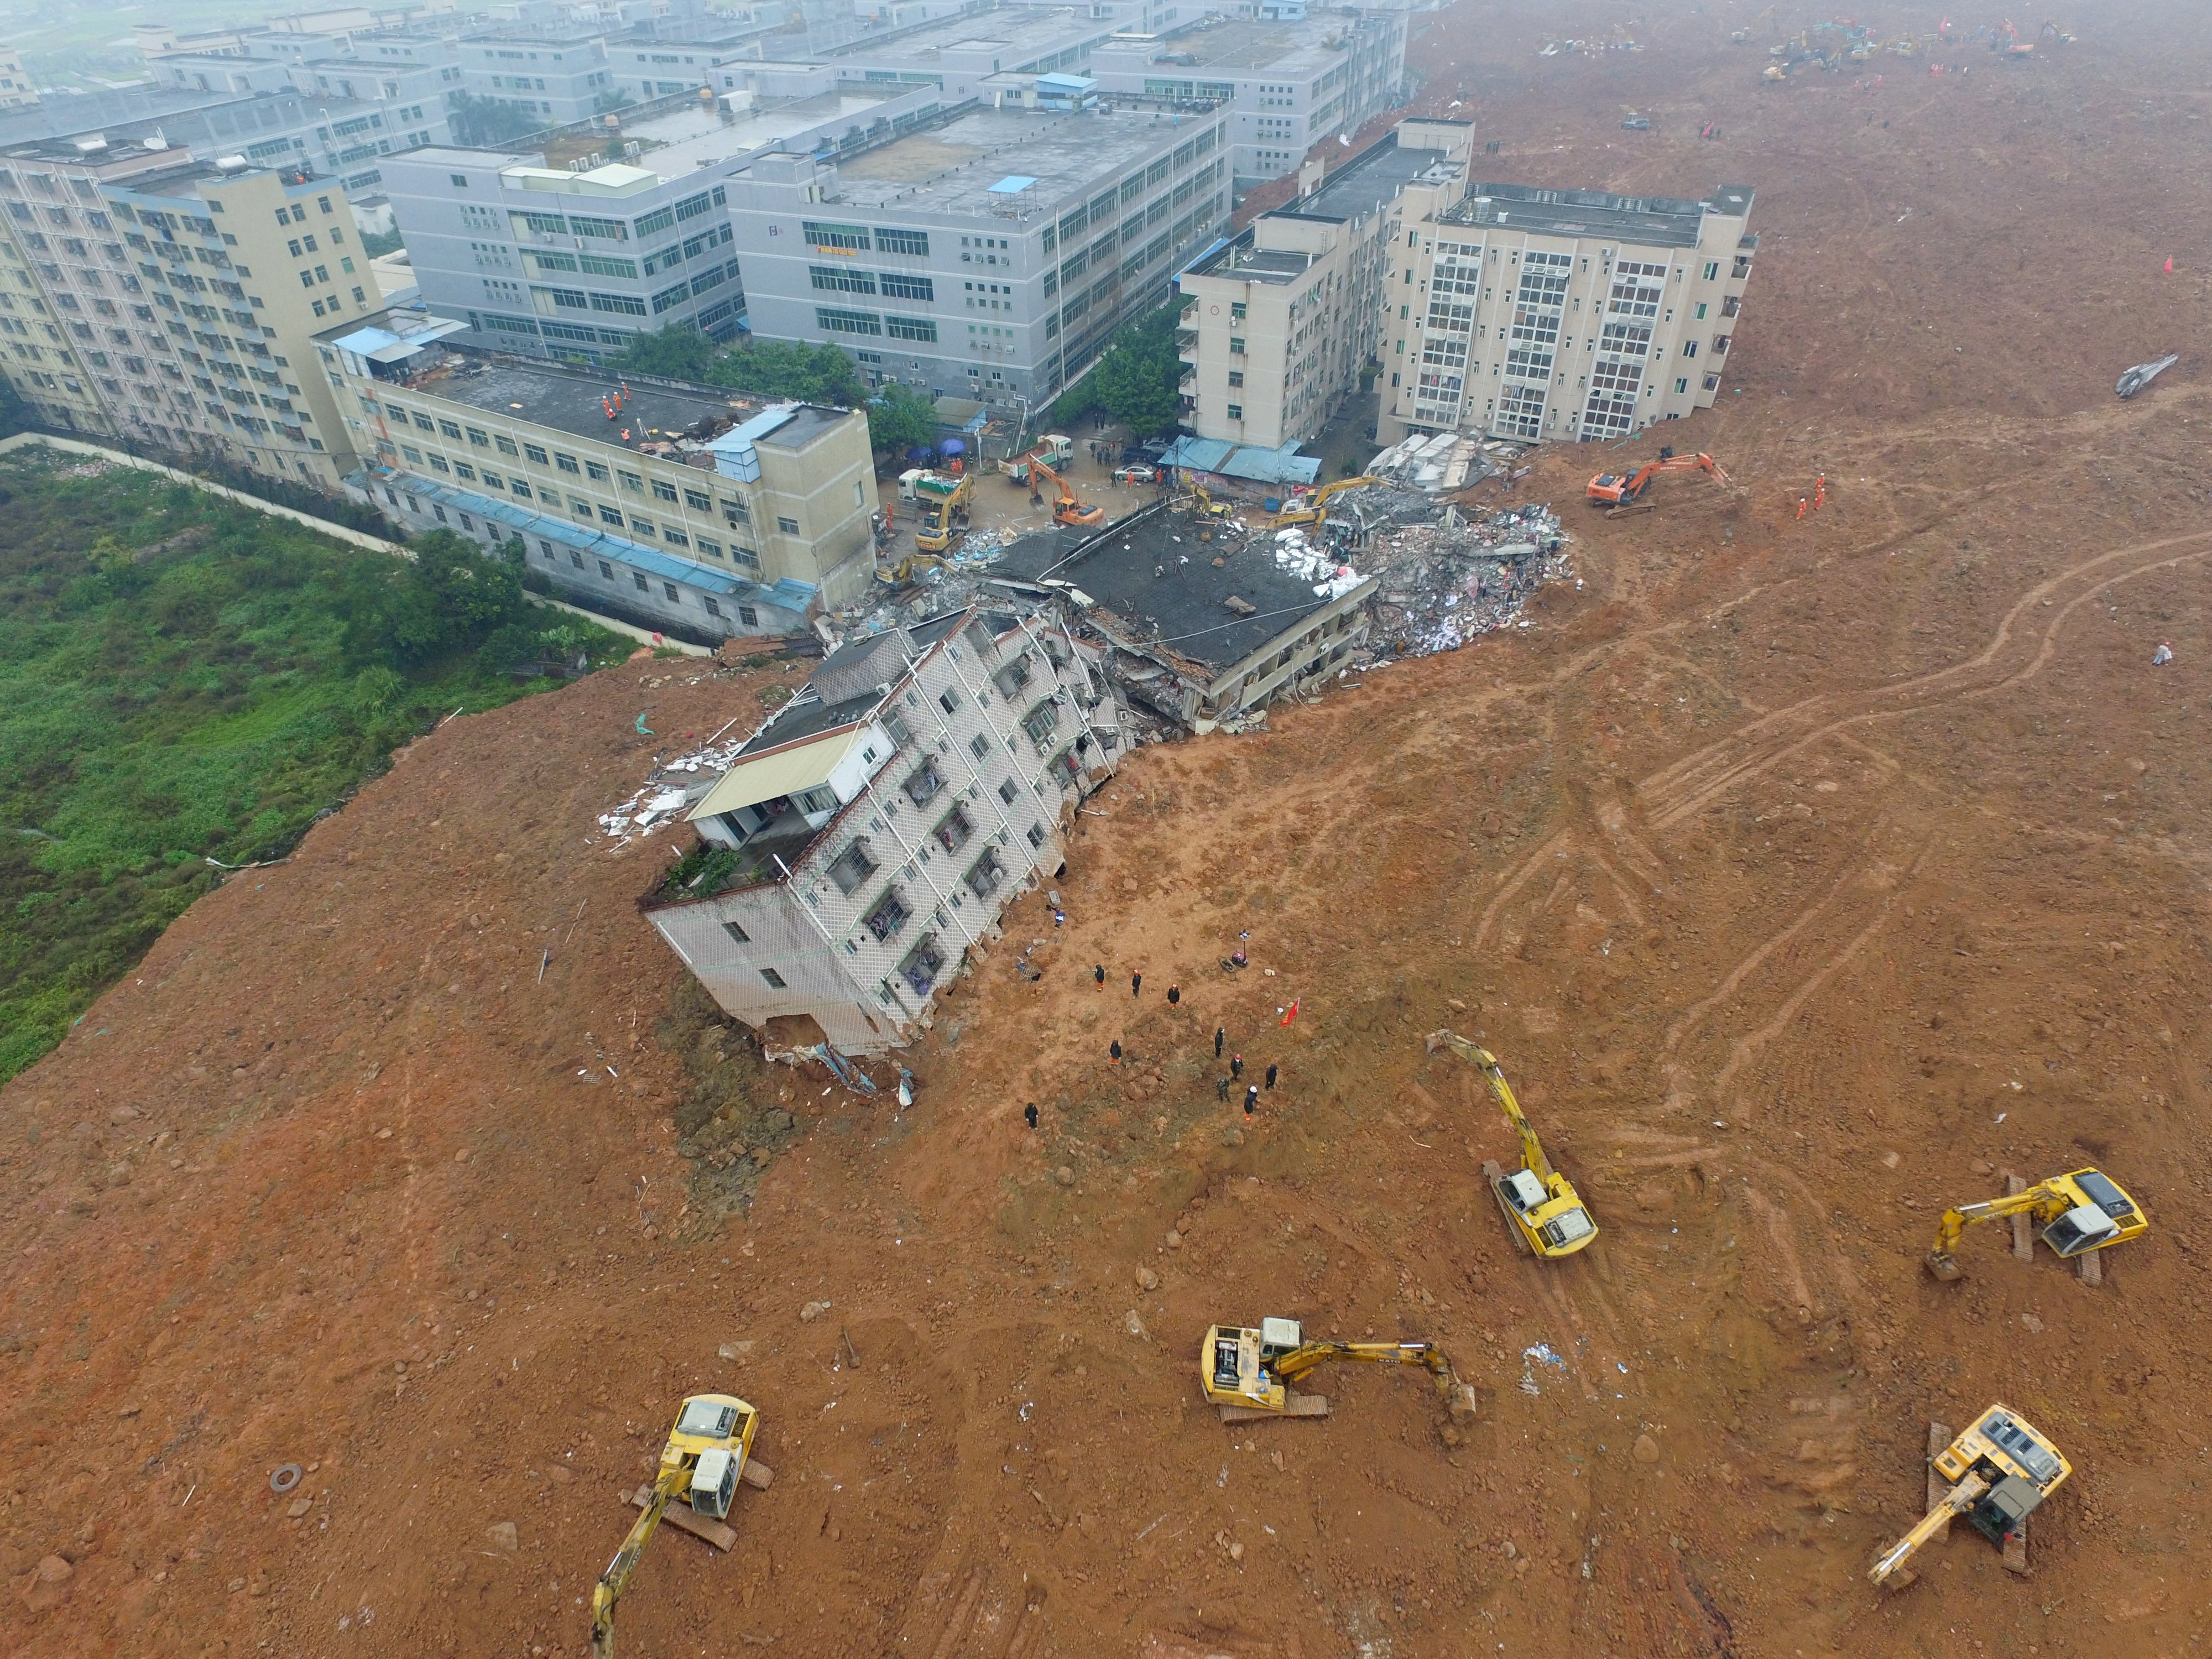 (151227) -- BEIJING, Dec. 27, 2015 (Xinhua) -- Rescuers work at the landslide site of an industrial park in Shenzhen, south China's Guangdong Province, Dec. 21, 2015. (Xinhua/Zheng Lei)